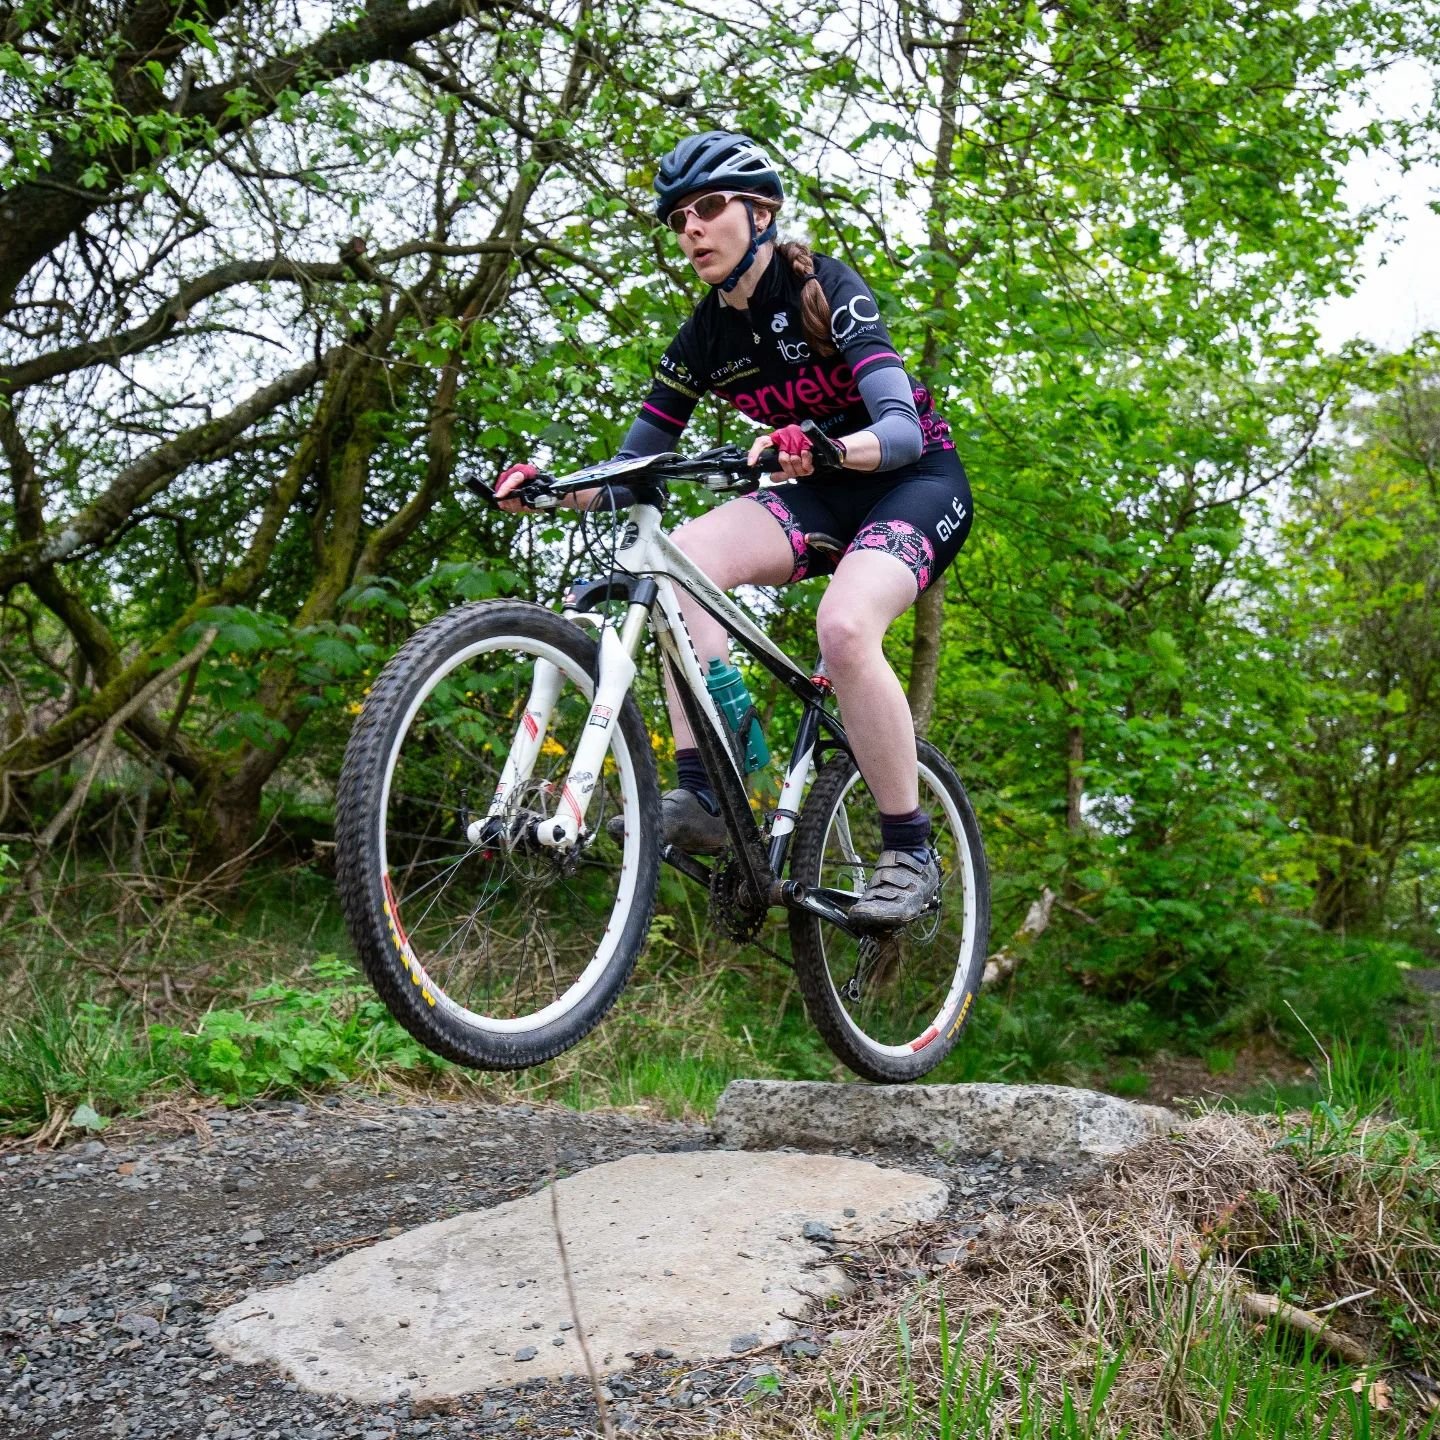 @eat_on_alice flying into the weekend After her podium last week on the flat and fast Lochore Meadows XC course!!

Keep an eye out for more Hervelo jerseys this weekend at @gravelfoyle_events Grand Old Dukes 👀

#womensmtb #gravelbike #cyclingedinbur